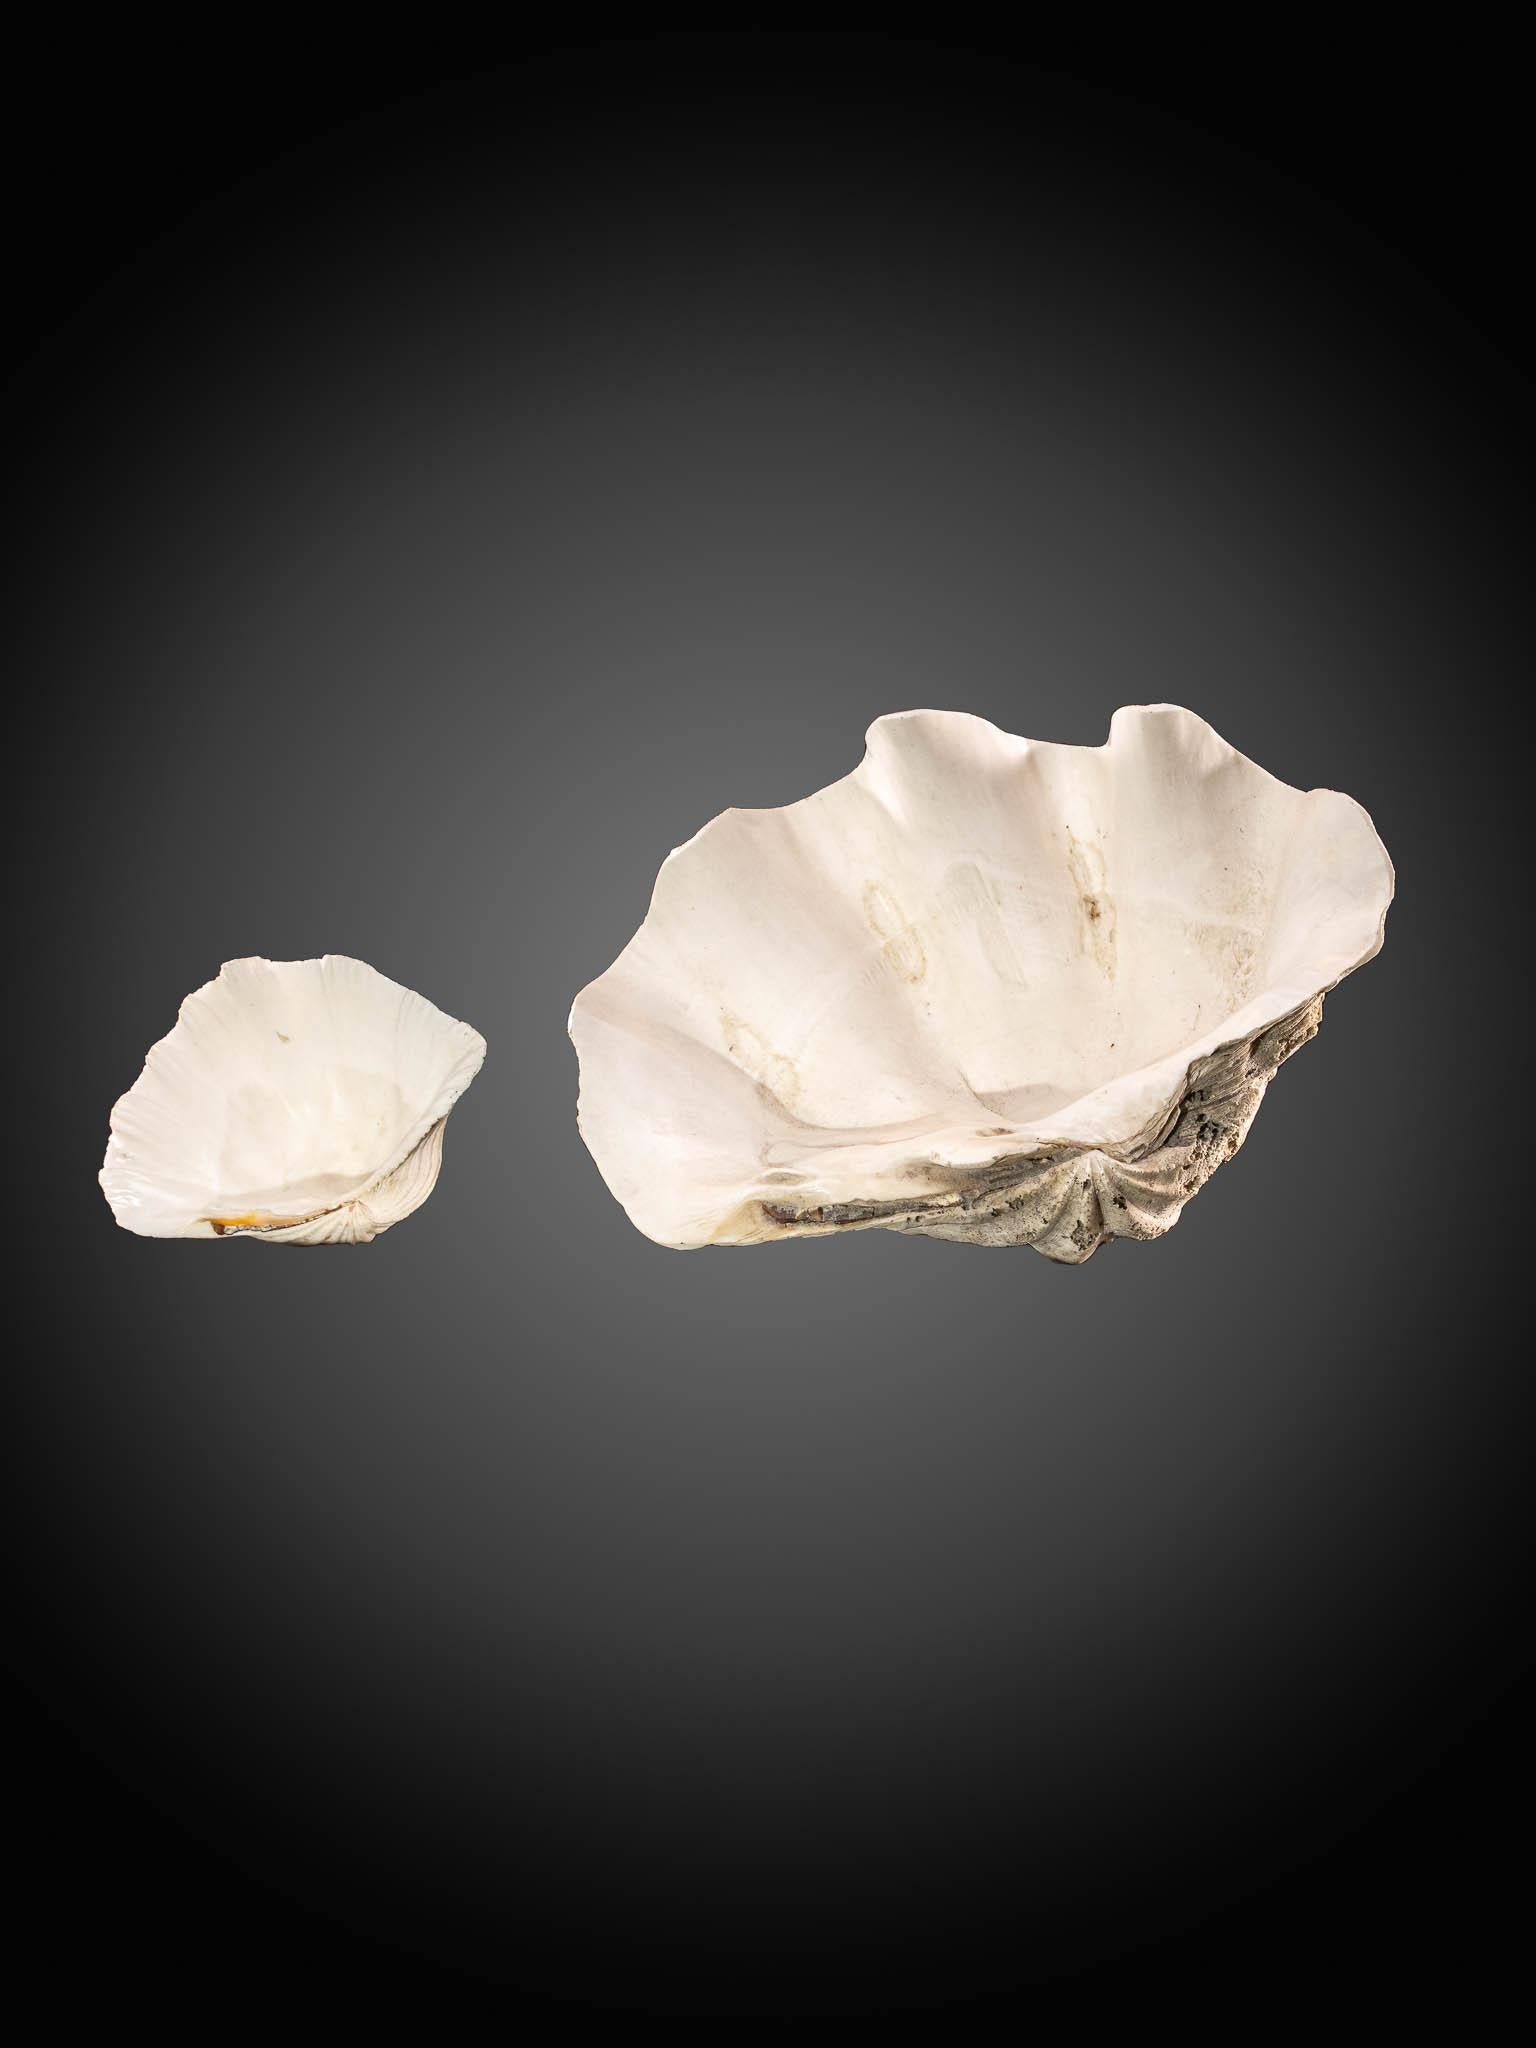 South African  Selection  of 2 Polished Tridacna or Giant Clam  For Sale